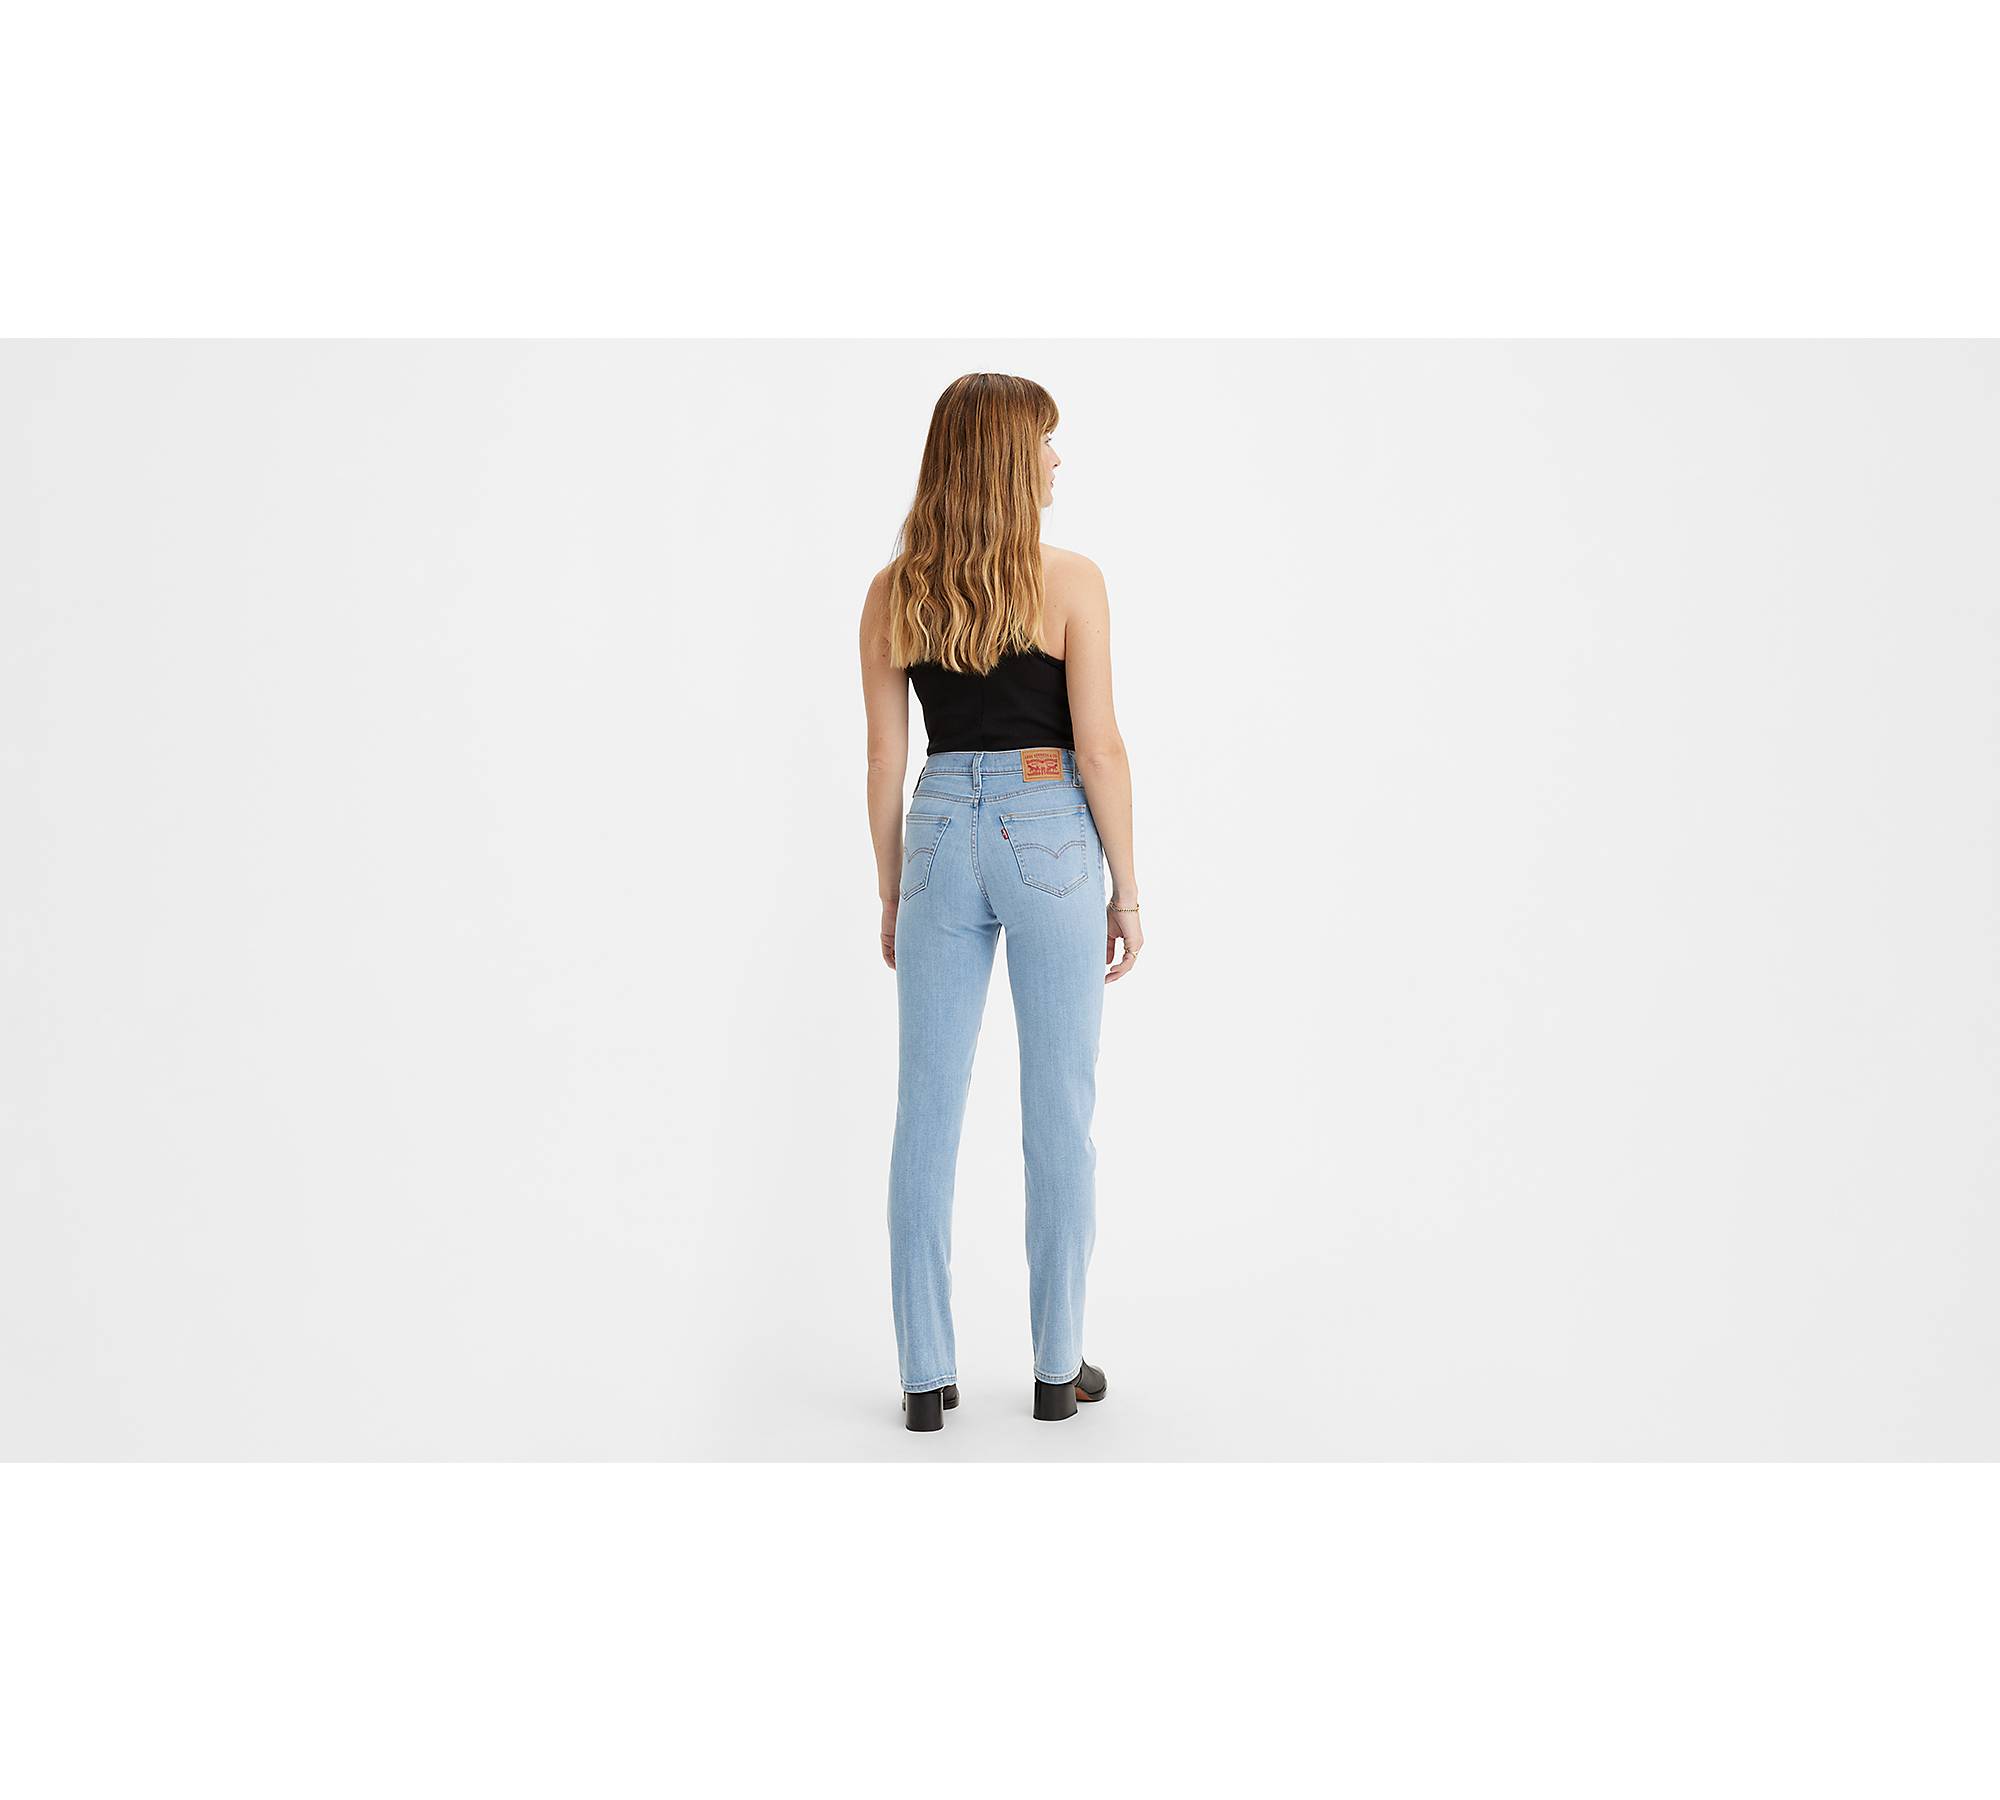  Levis Womens 724 High Rise Straight Jeans